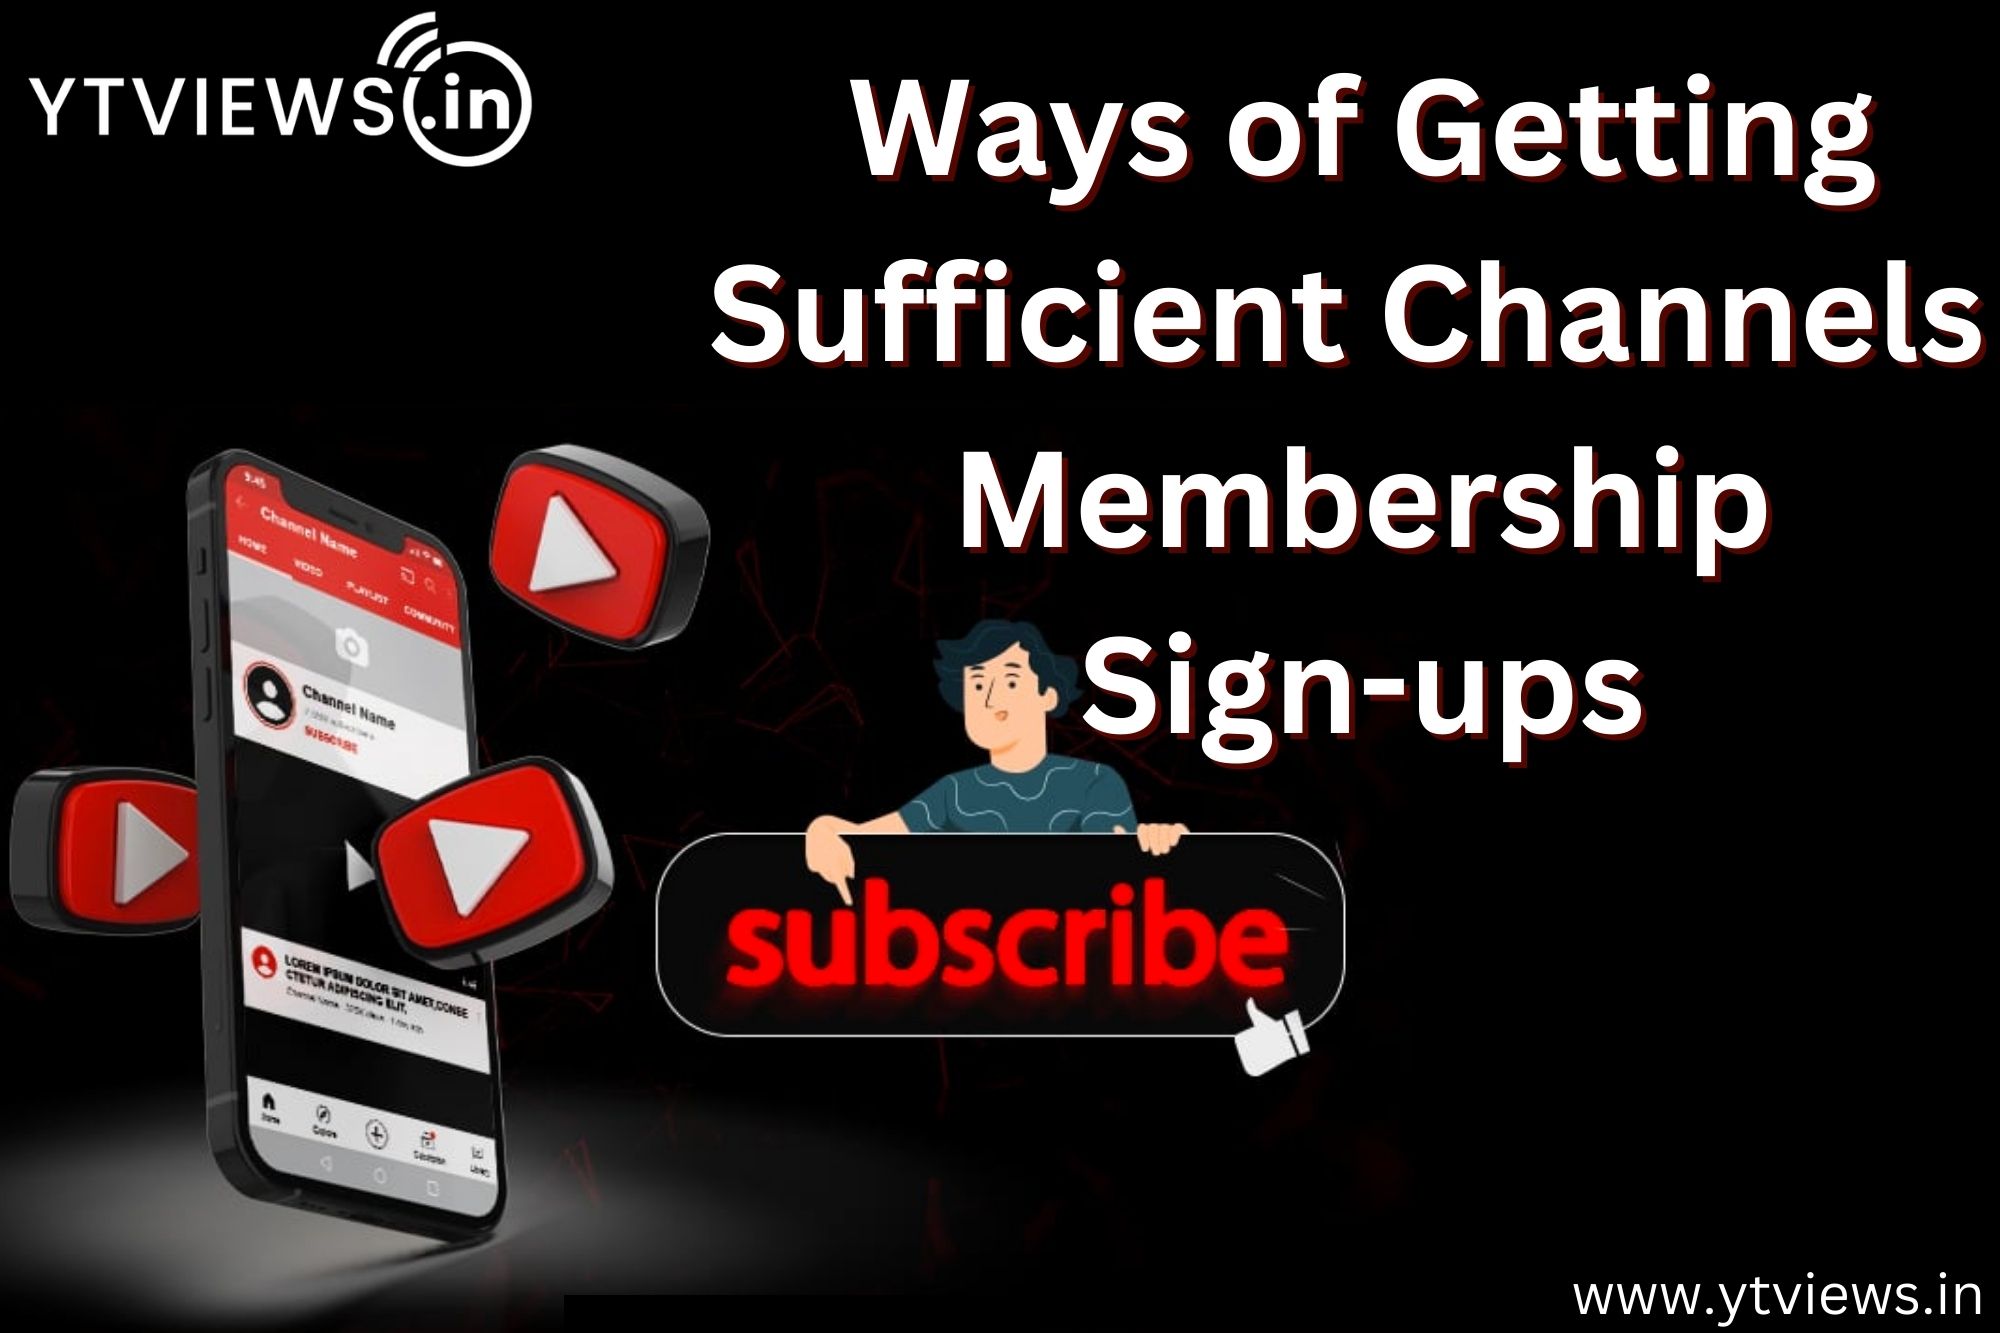 Ways of getting sufficient channel membership sign-ups